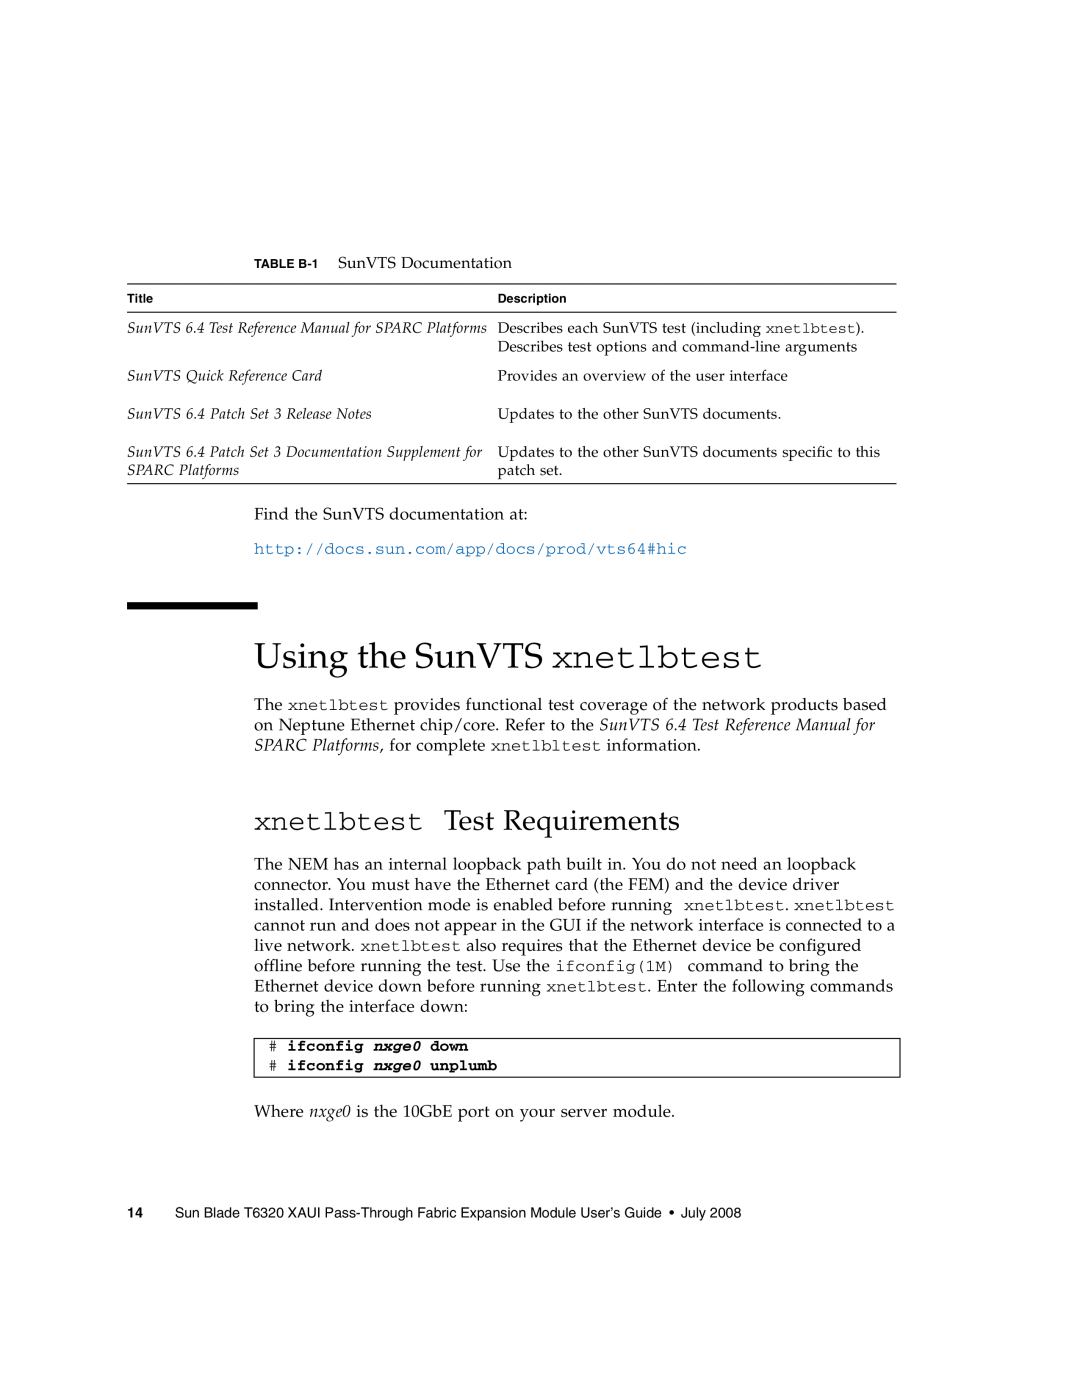 Sun Microsystems T6320 manual Using the SunVTS xnetlbtest, xnetlbtest Test Requirements 